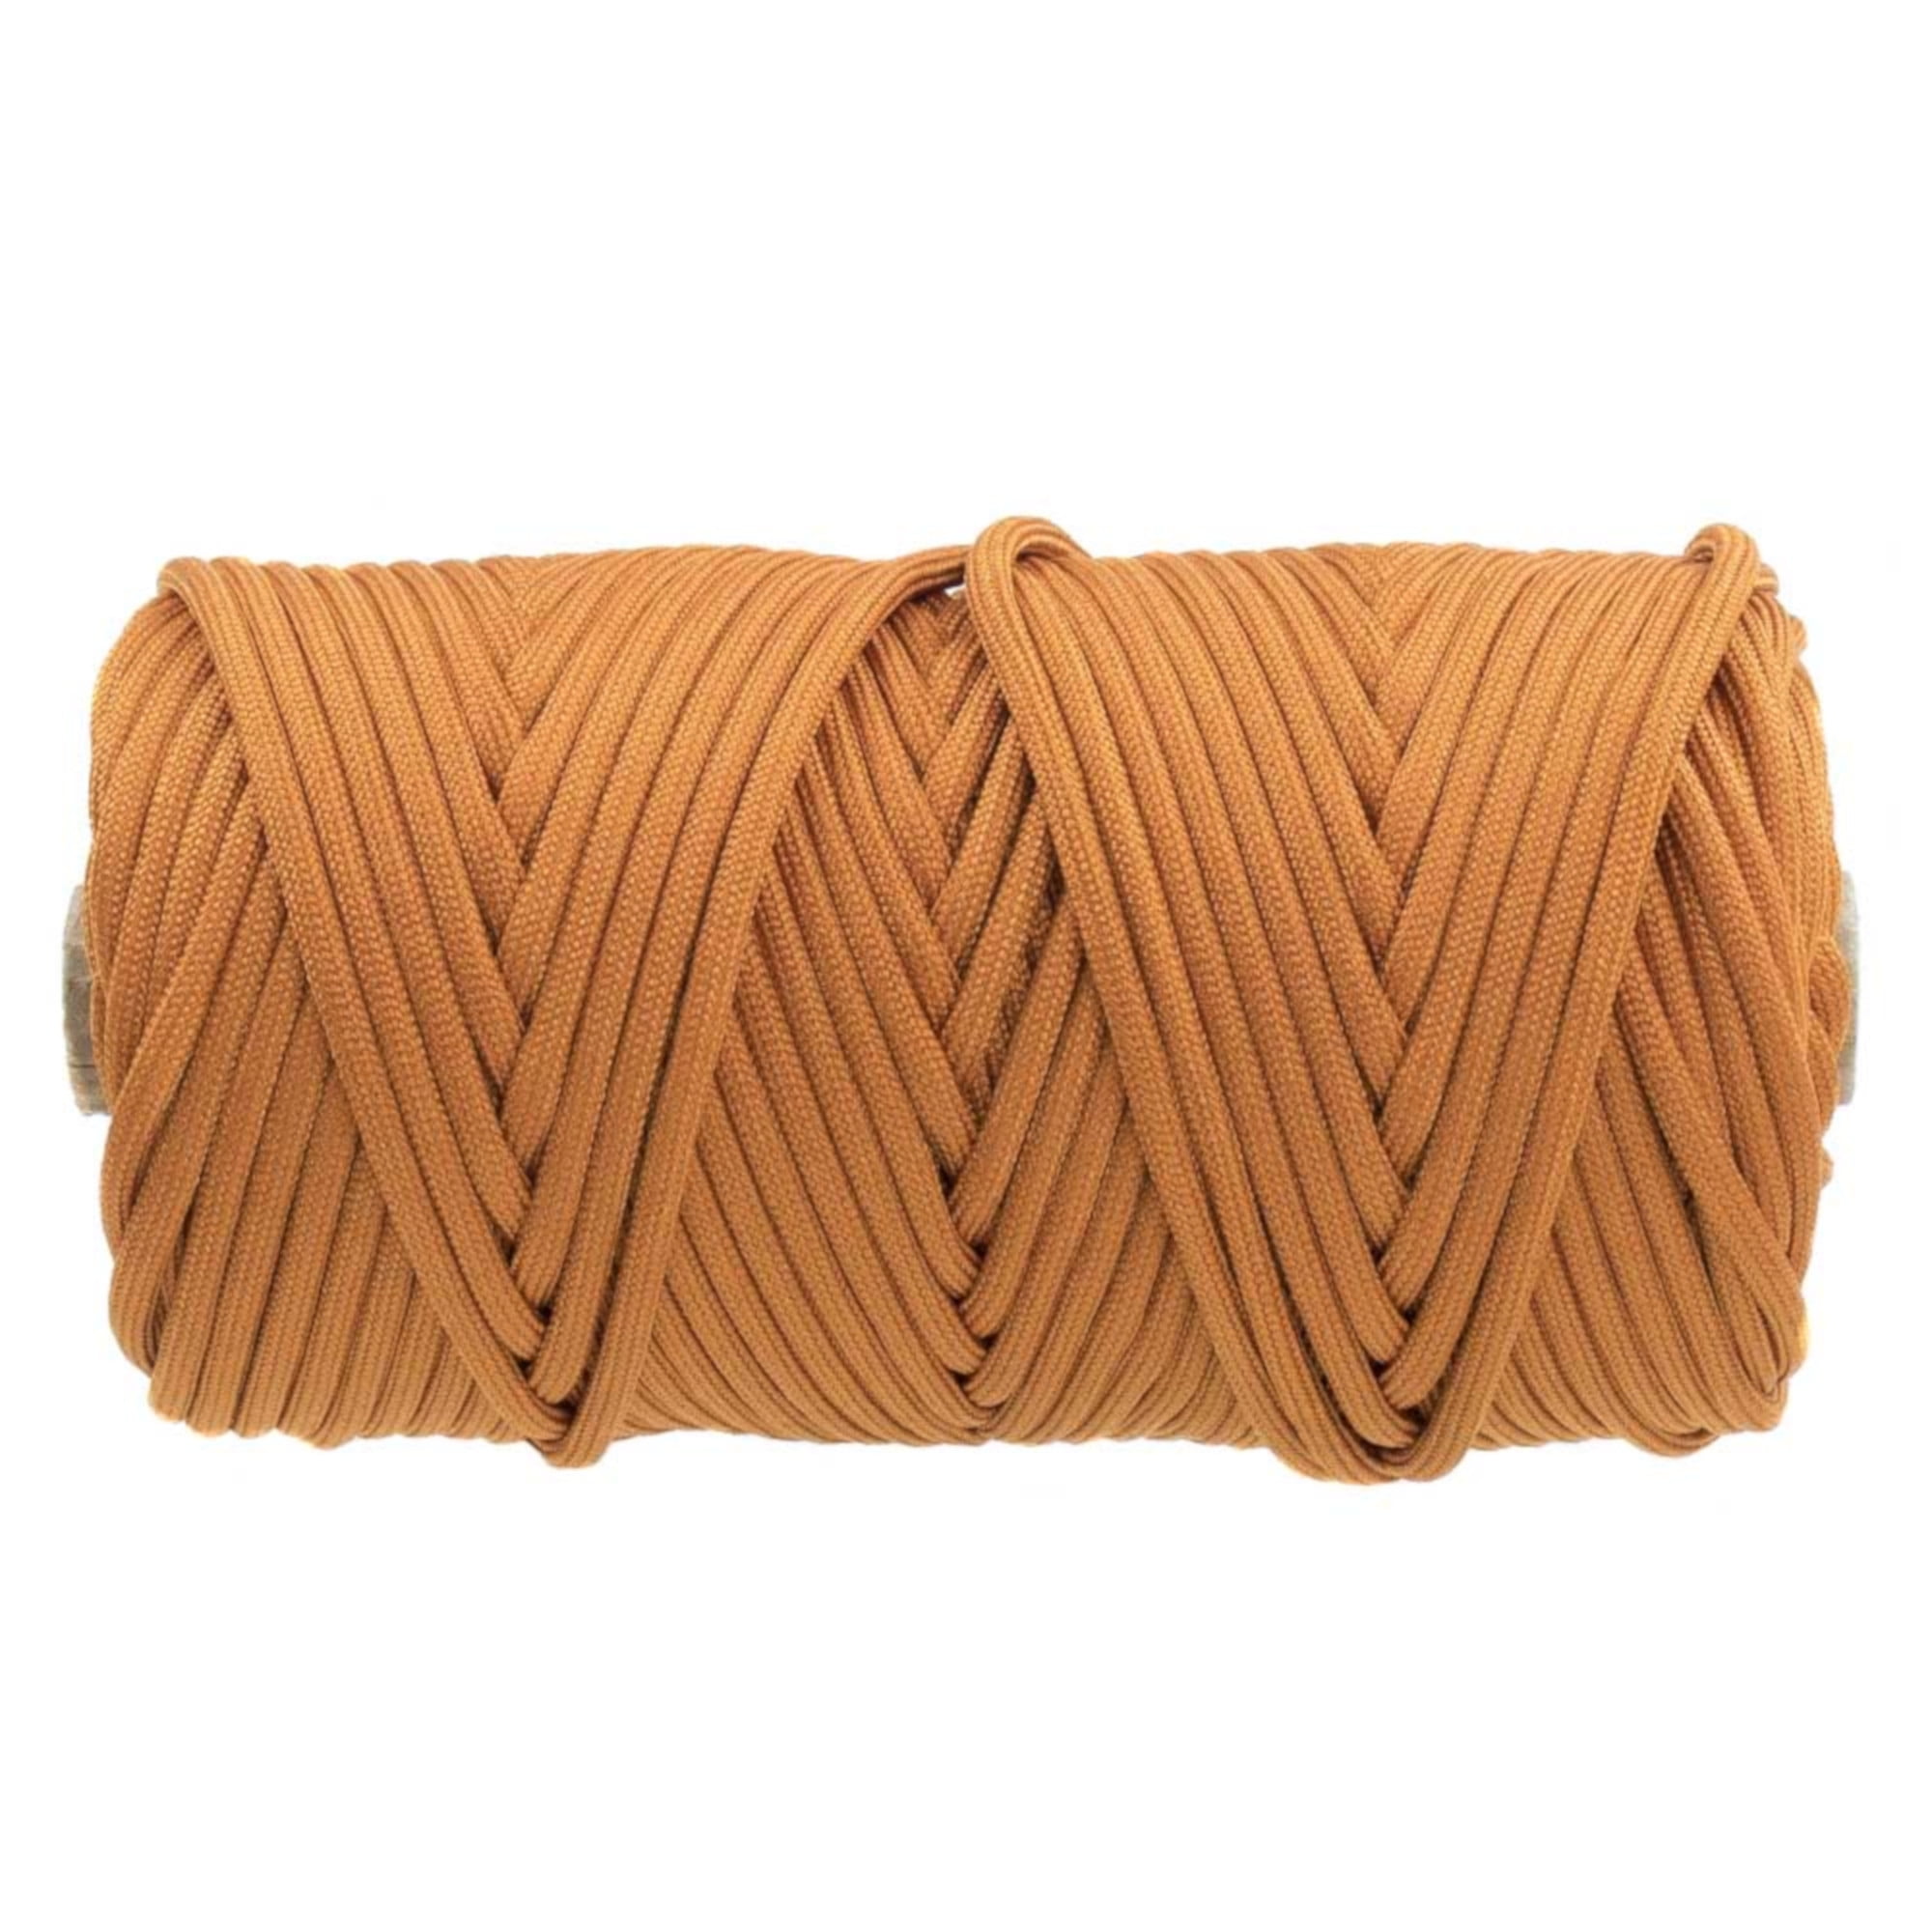 PARACORD PLANET 50 Feet 750 Lb Type Iv Paracord Authentic Parachute Cord Stronger Than Mil-C-5040-H Military Grade Paracord By 200 Pounds Tan